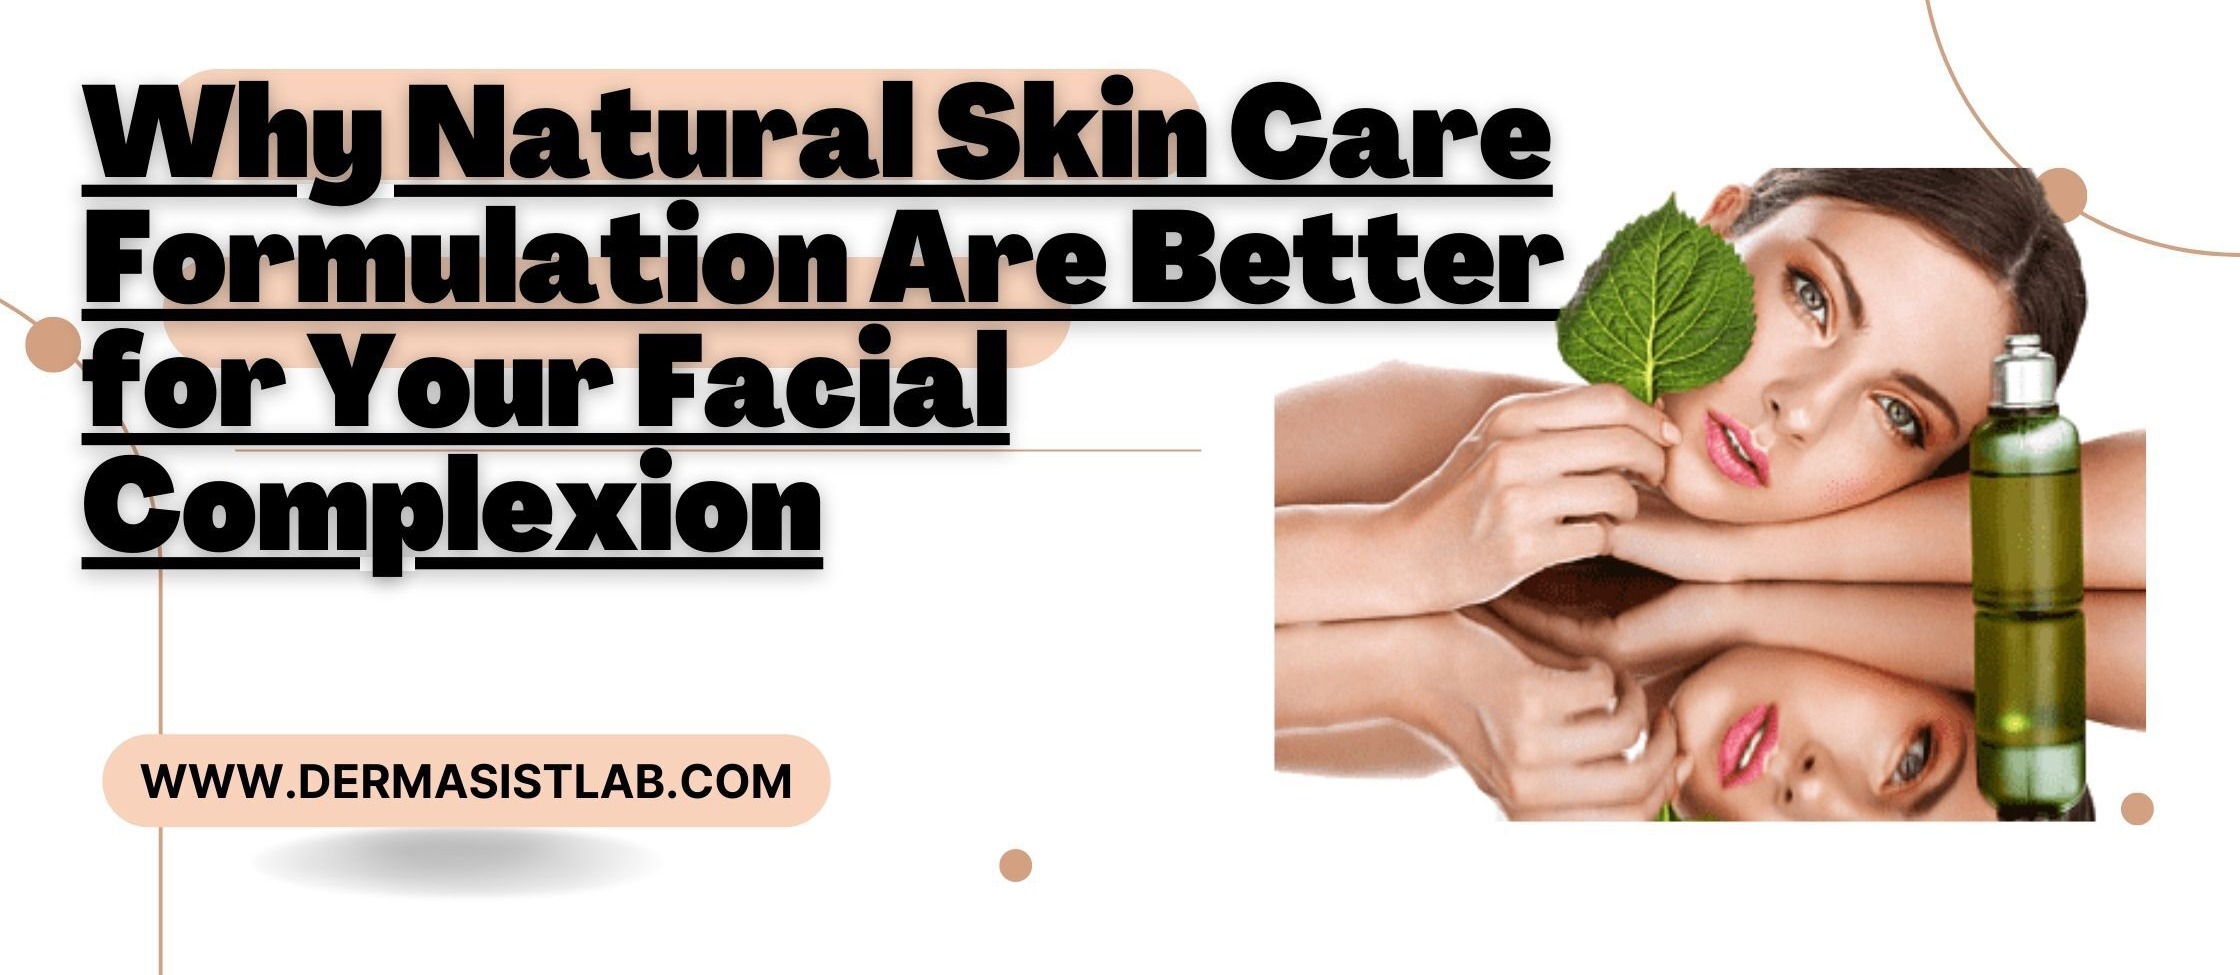 Why Natural Skin Care Formulation Are Better for Your Facial Complexion